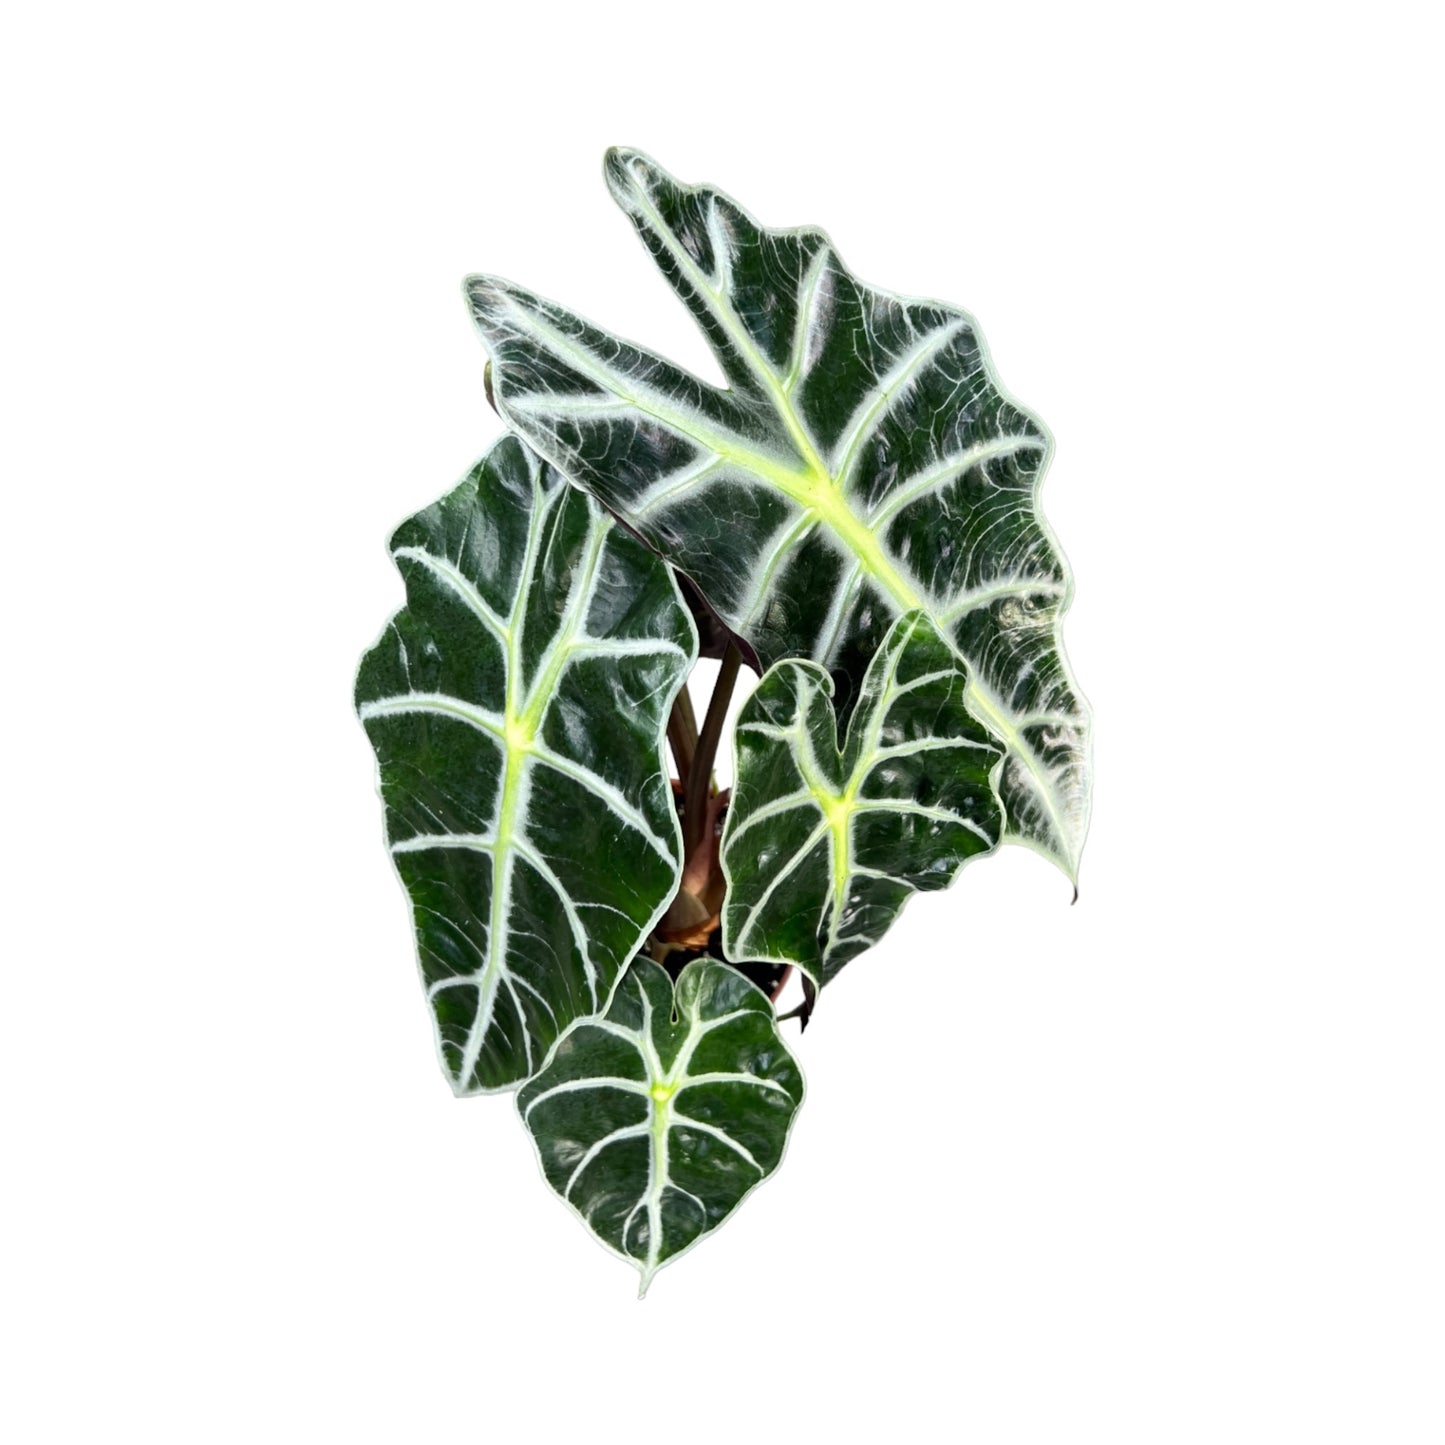 Alocasia 12cm Mix in Basket - Green Plant The Horti House